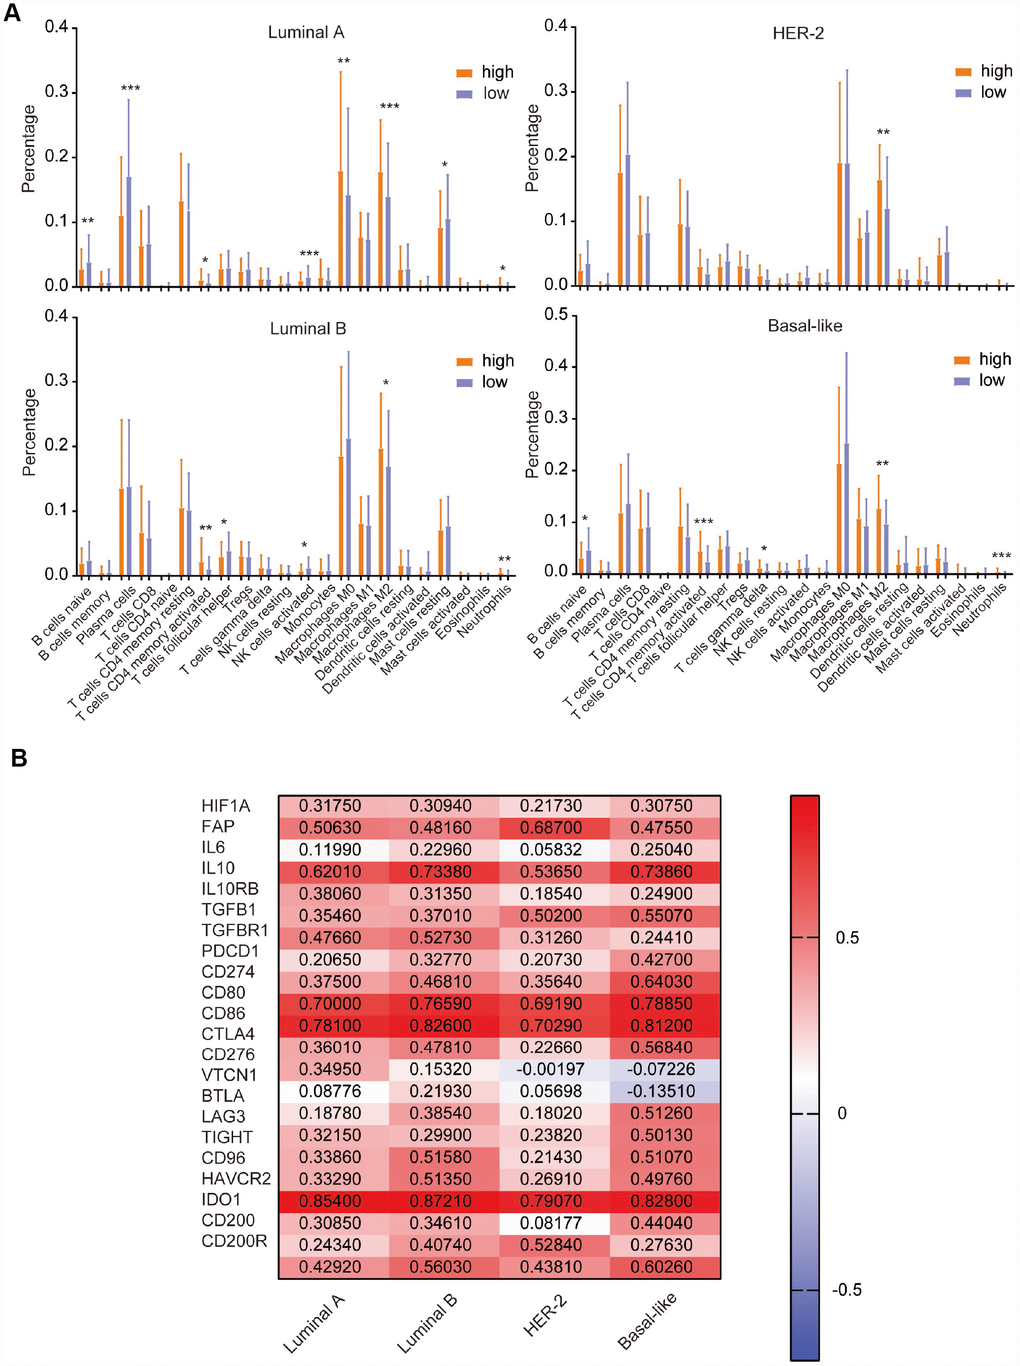 Comparison of the expression of LM22 identified by CIBERSORT between high and low CD204 expression groups (A). Correlation of CD204 and immunosuppressive molecules among the luminal, HER2-positive, and basal-like subtypes of breast cancer (B).